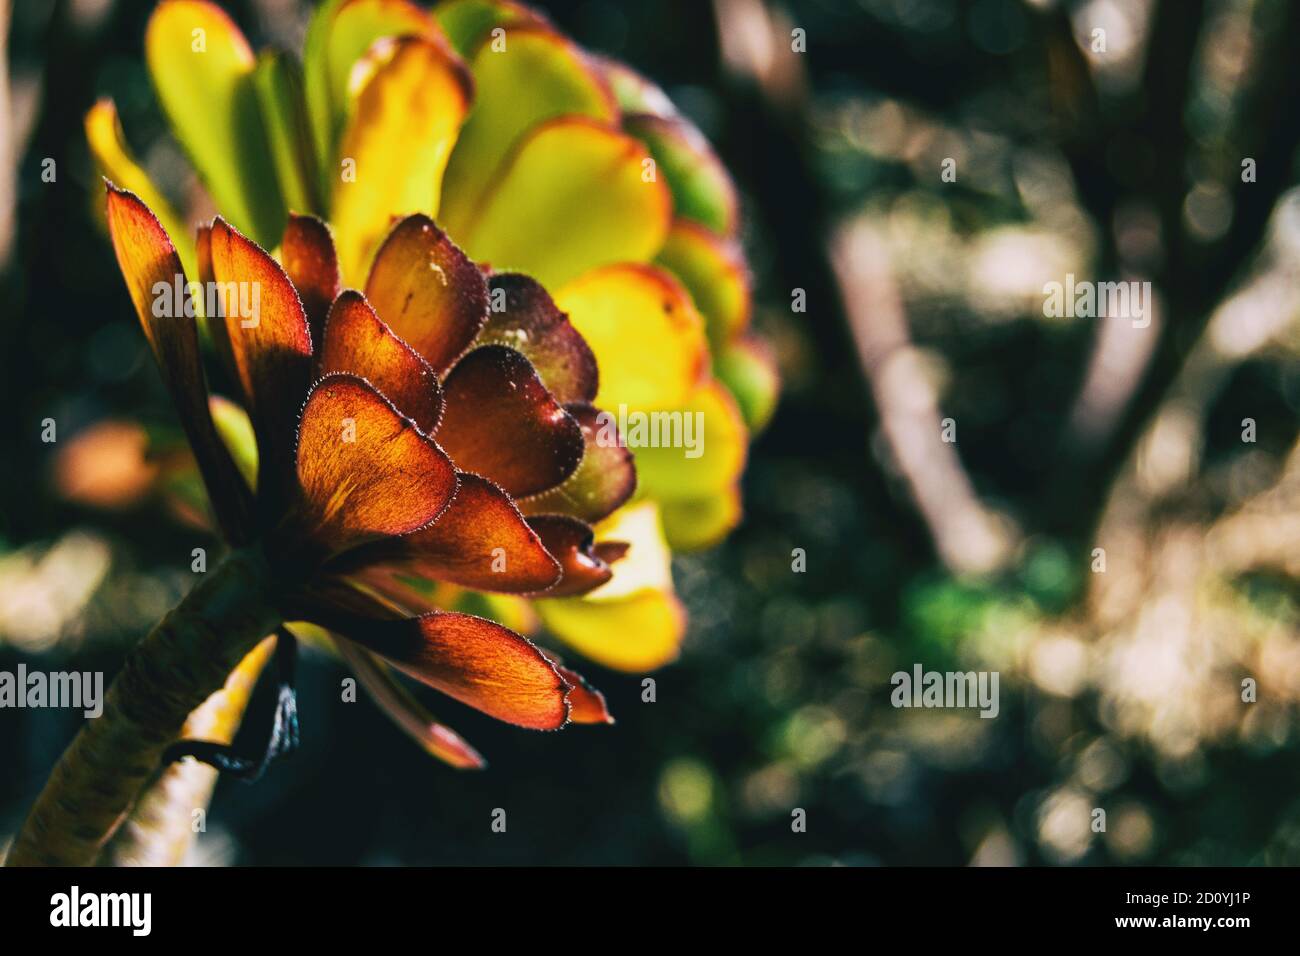 Detail of an aeonium arboreum taken by the side illuminated by sunlight Stock Photo